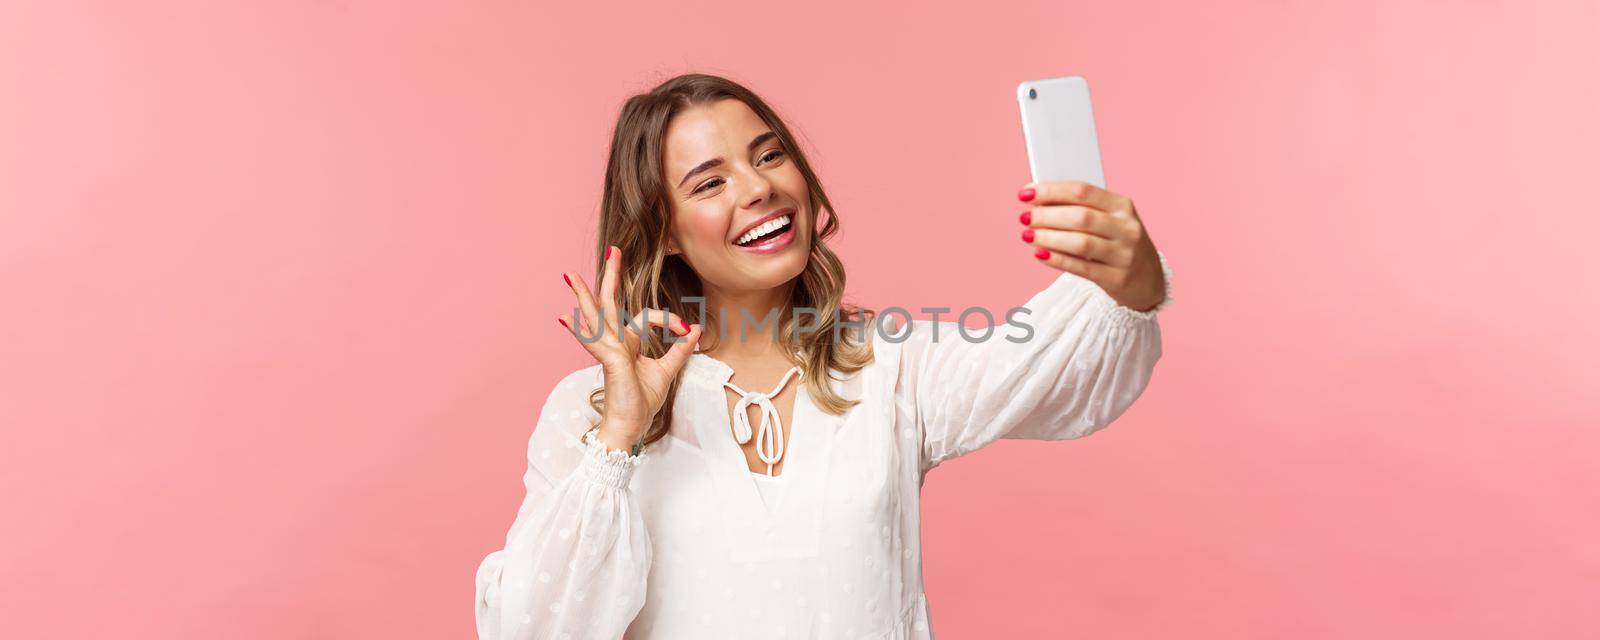 Close-up of satisfied good-looking blond girl in white dress, taking selfie, record mobile phone video, show okay satisfactory sign with pleased nod, smiling agree or recommend, pink background.